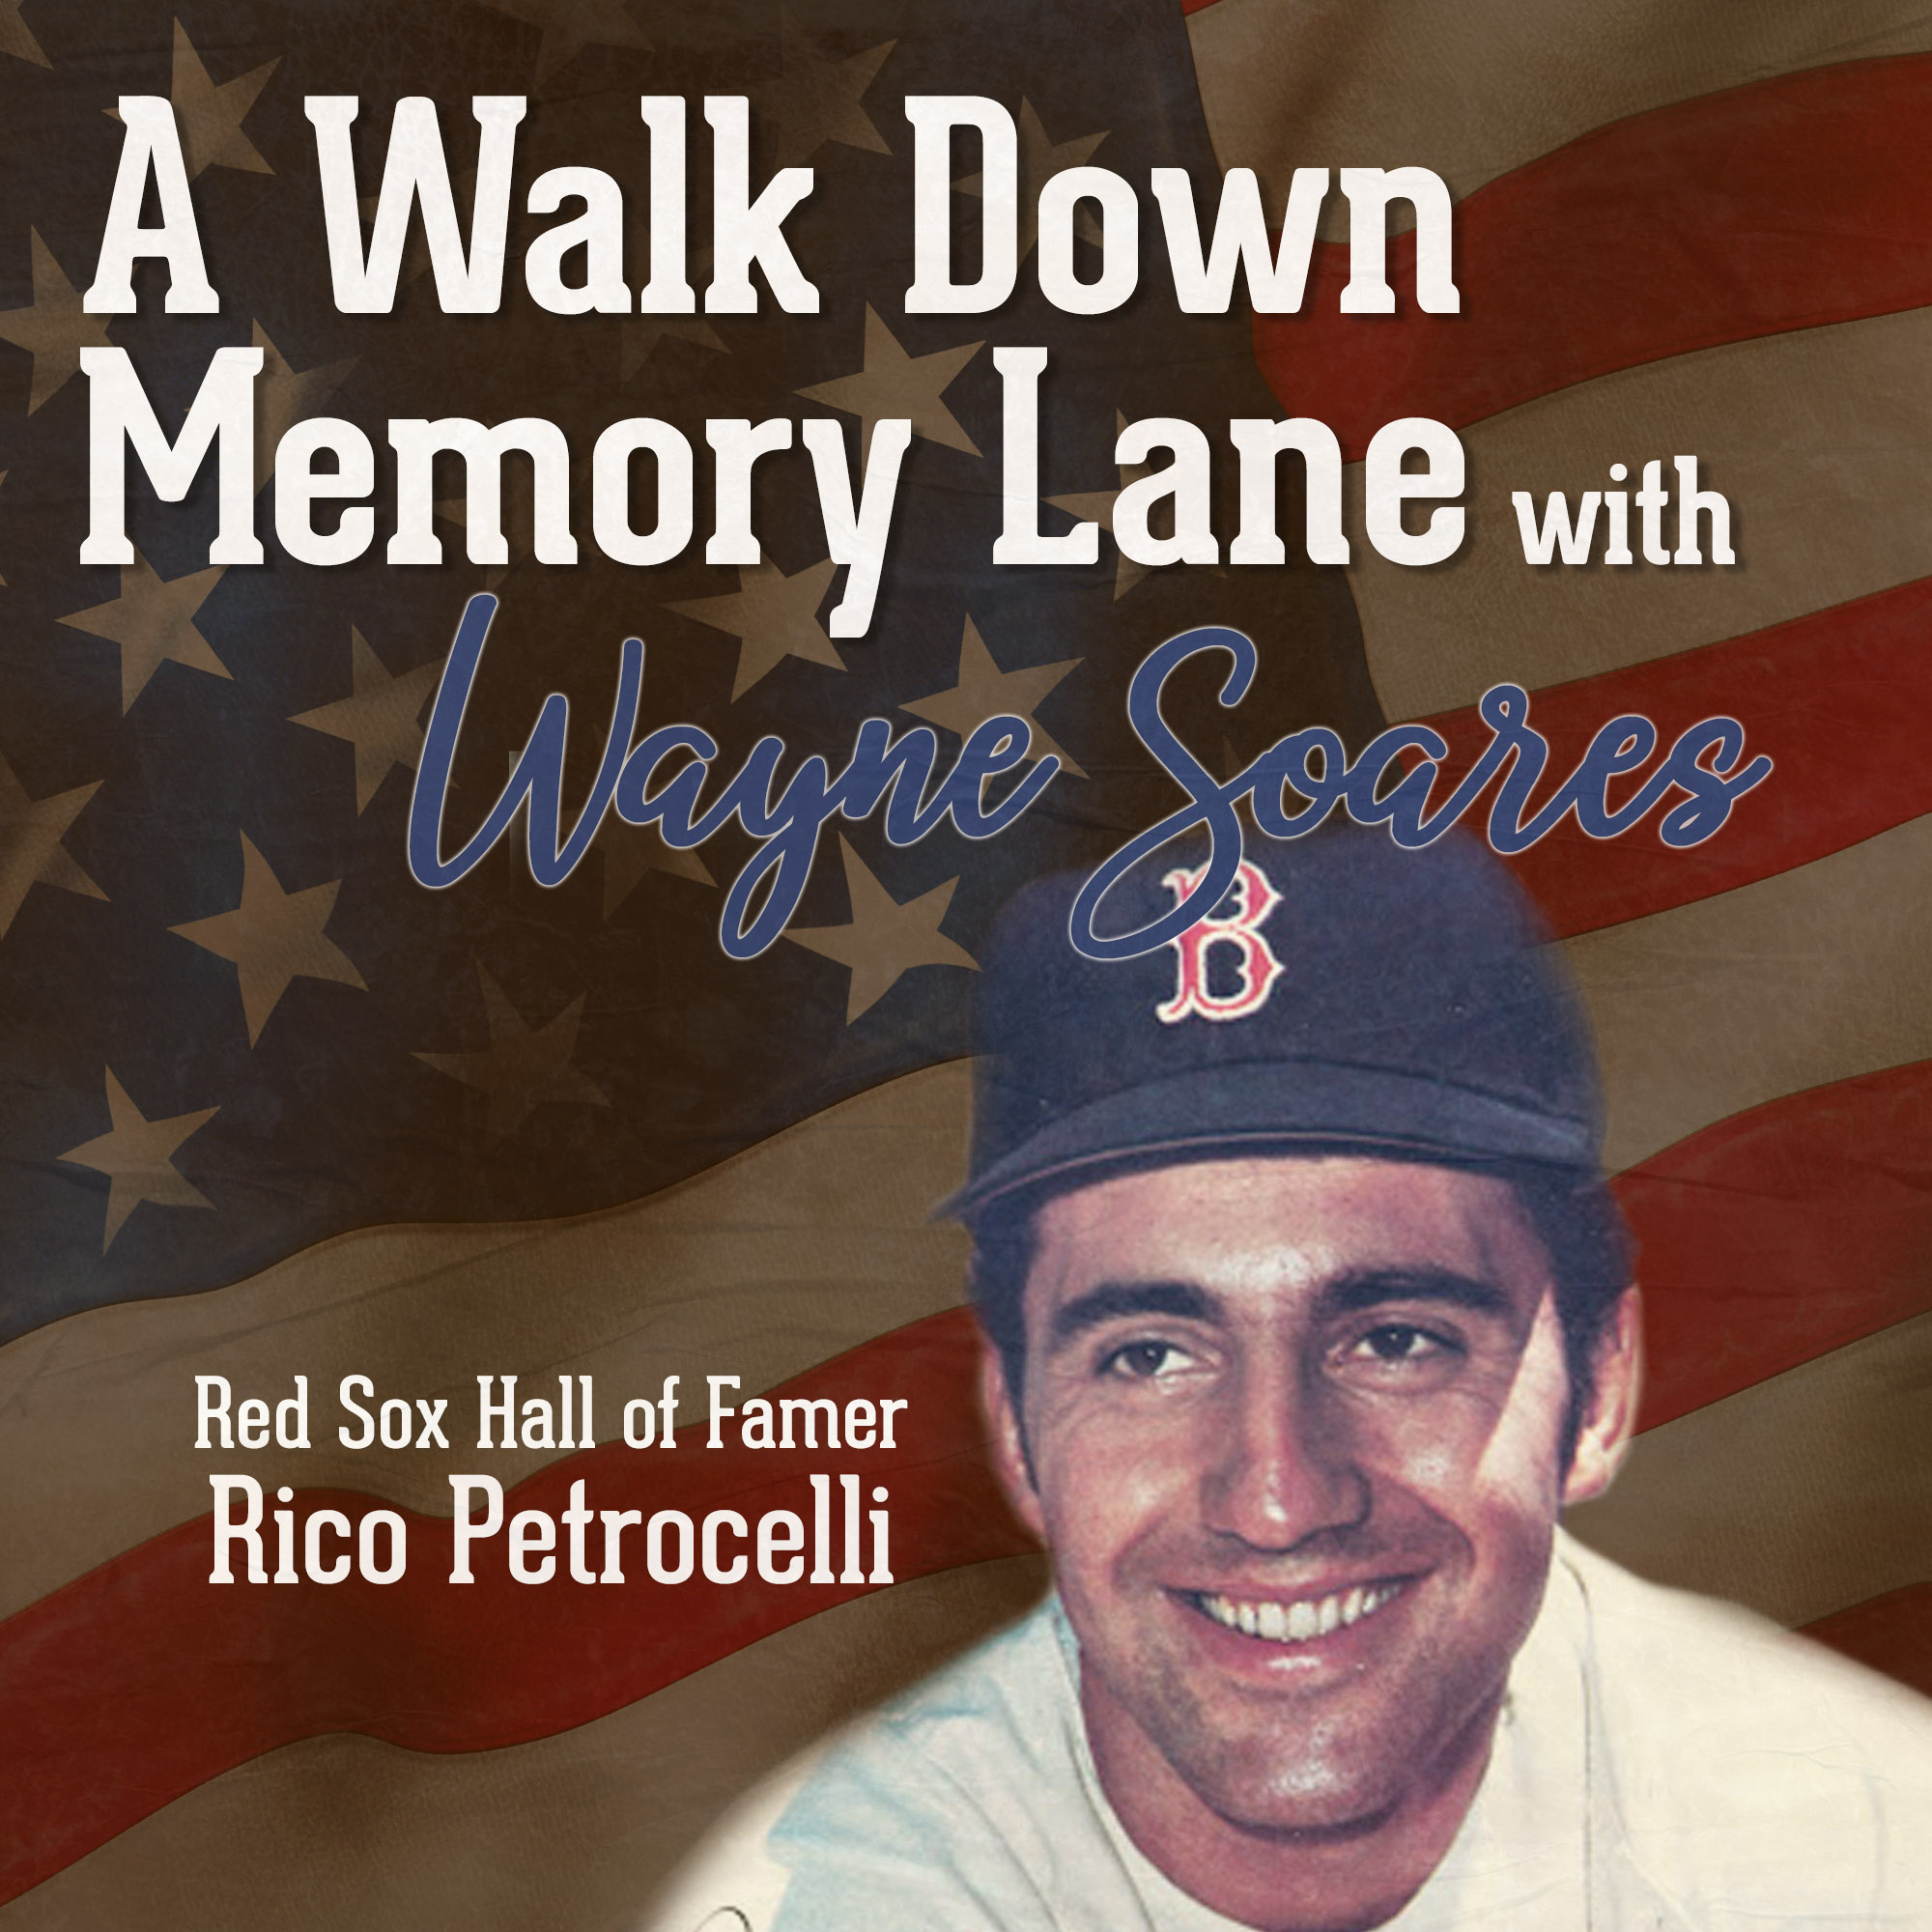 Rico Petrocelli-Red Sox Hall of Famer